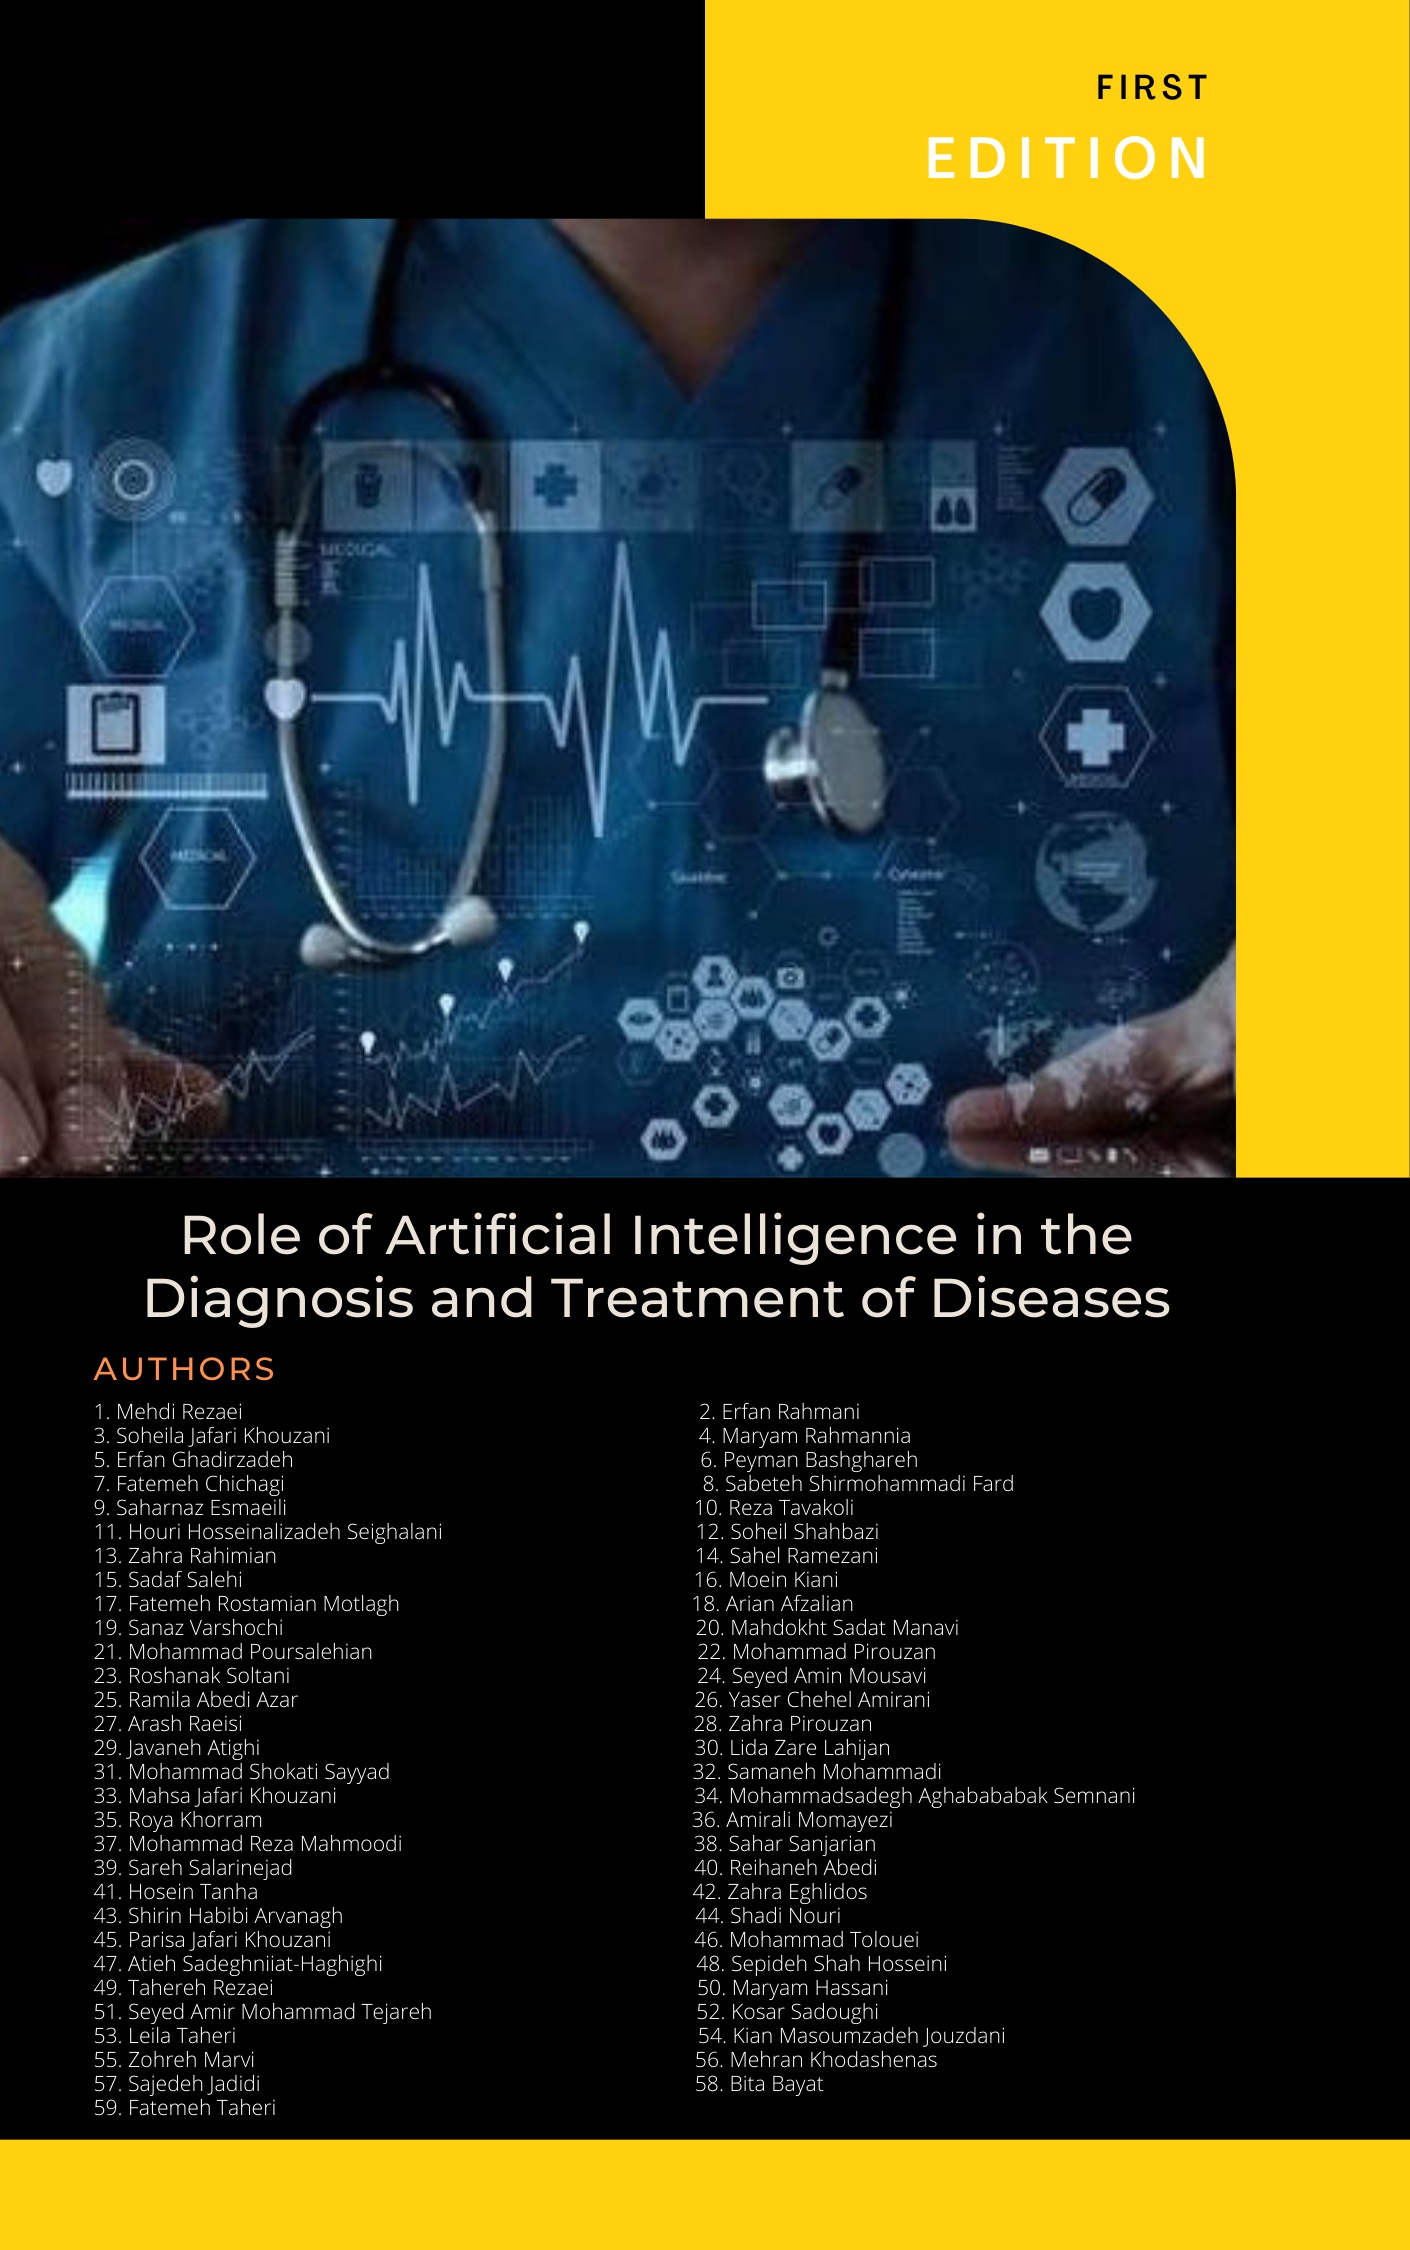 Role of Artificial Intelligence in the Diagnosis and Treatment of Diseases